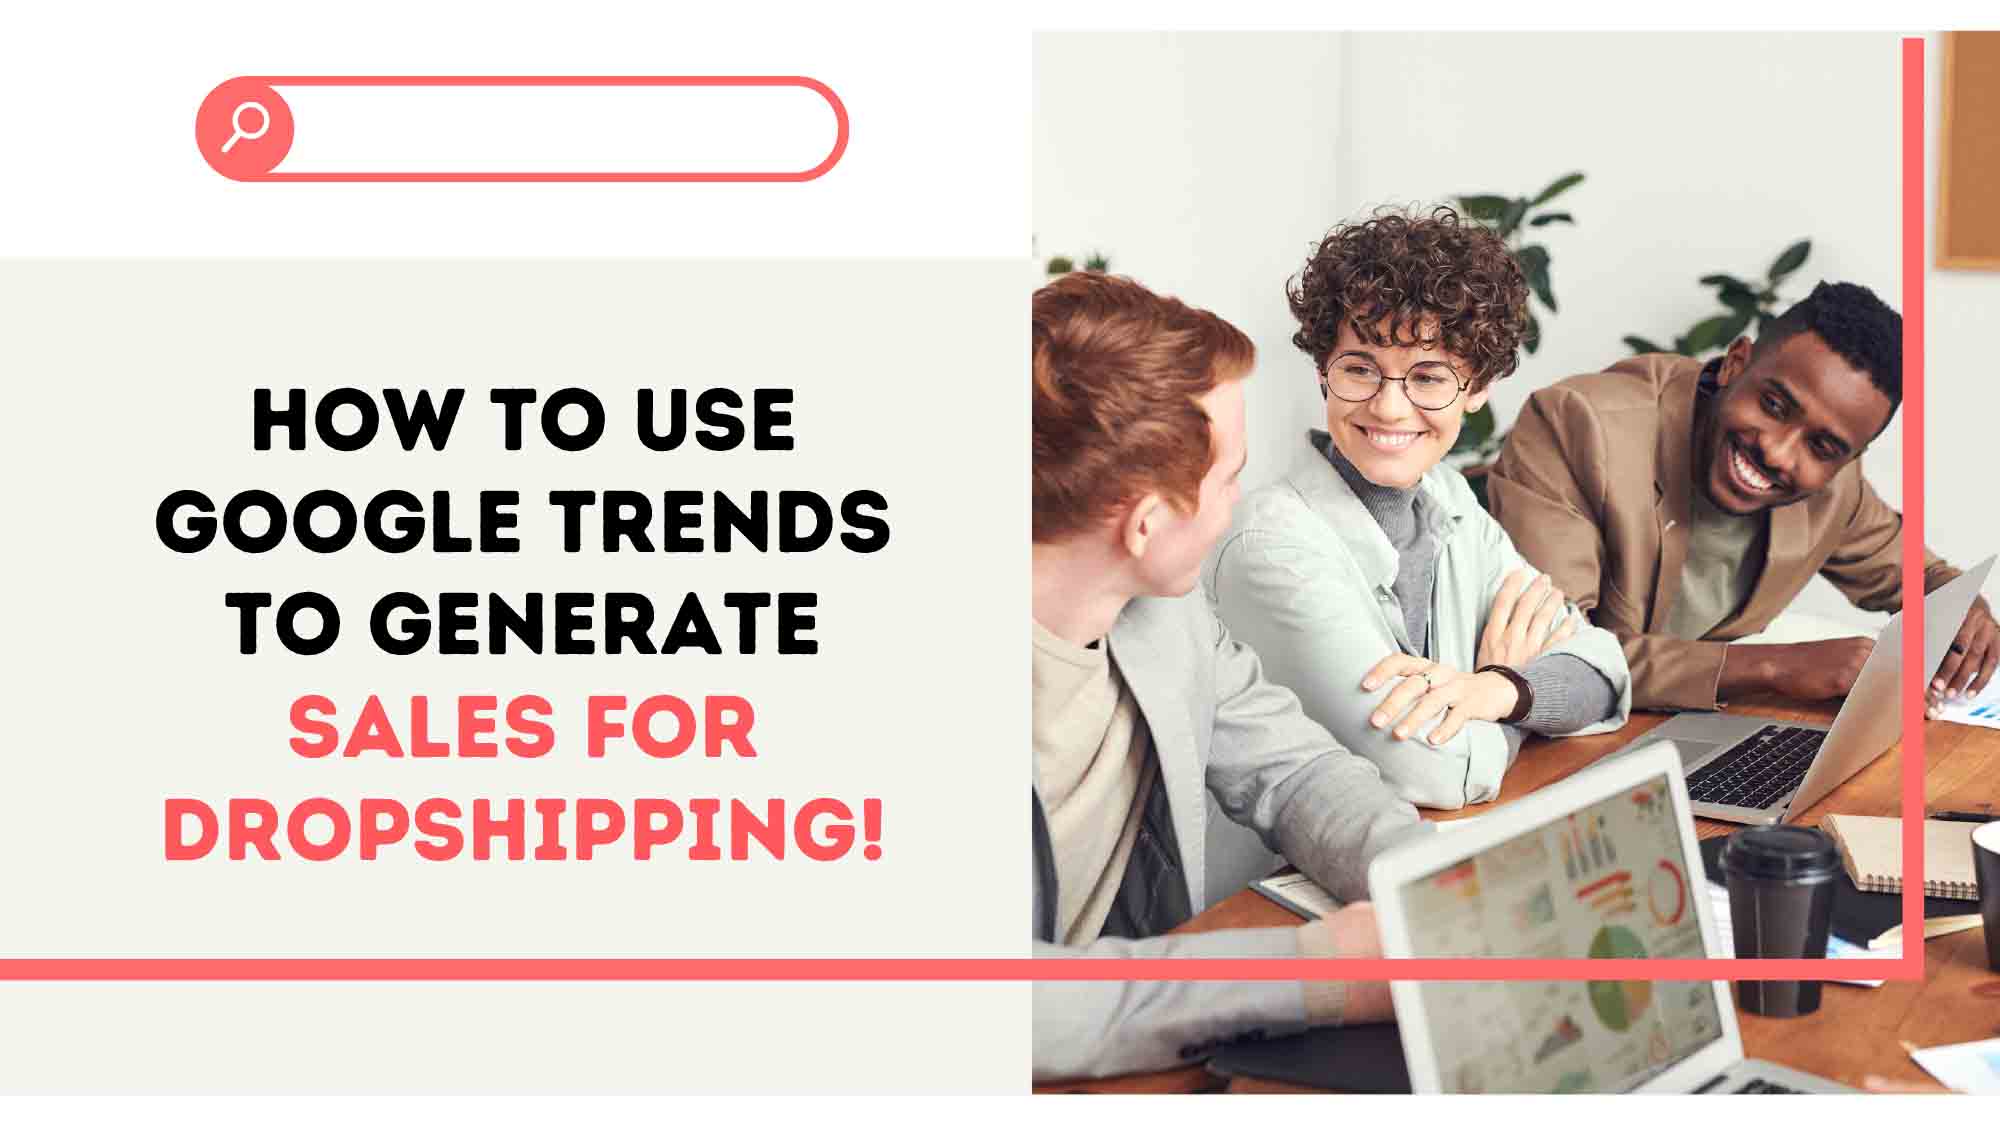 How To Use Google Trends To Generate Sales For Dropshipping!